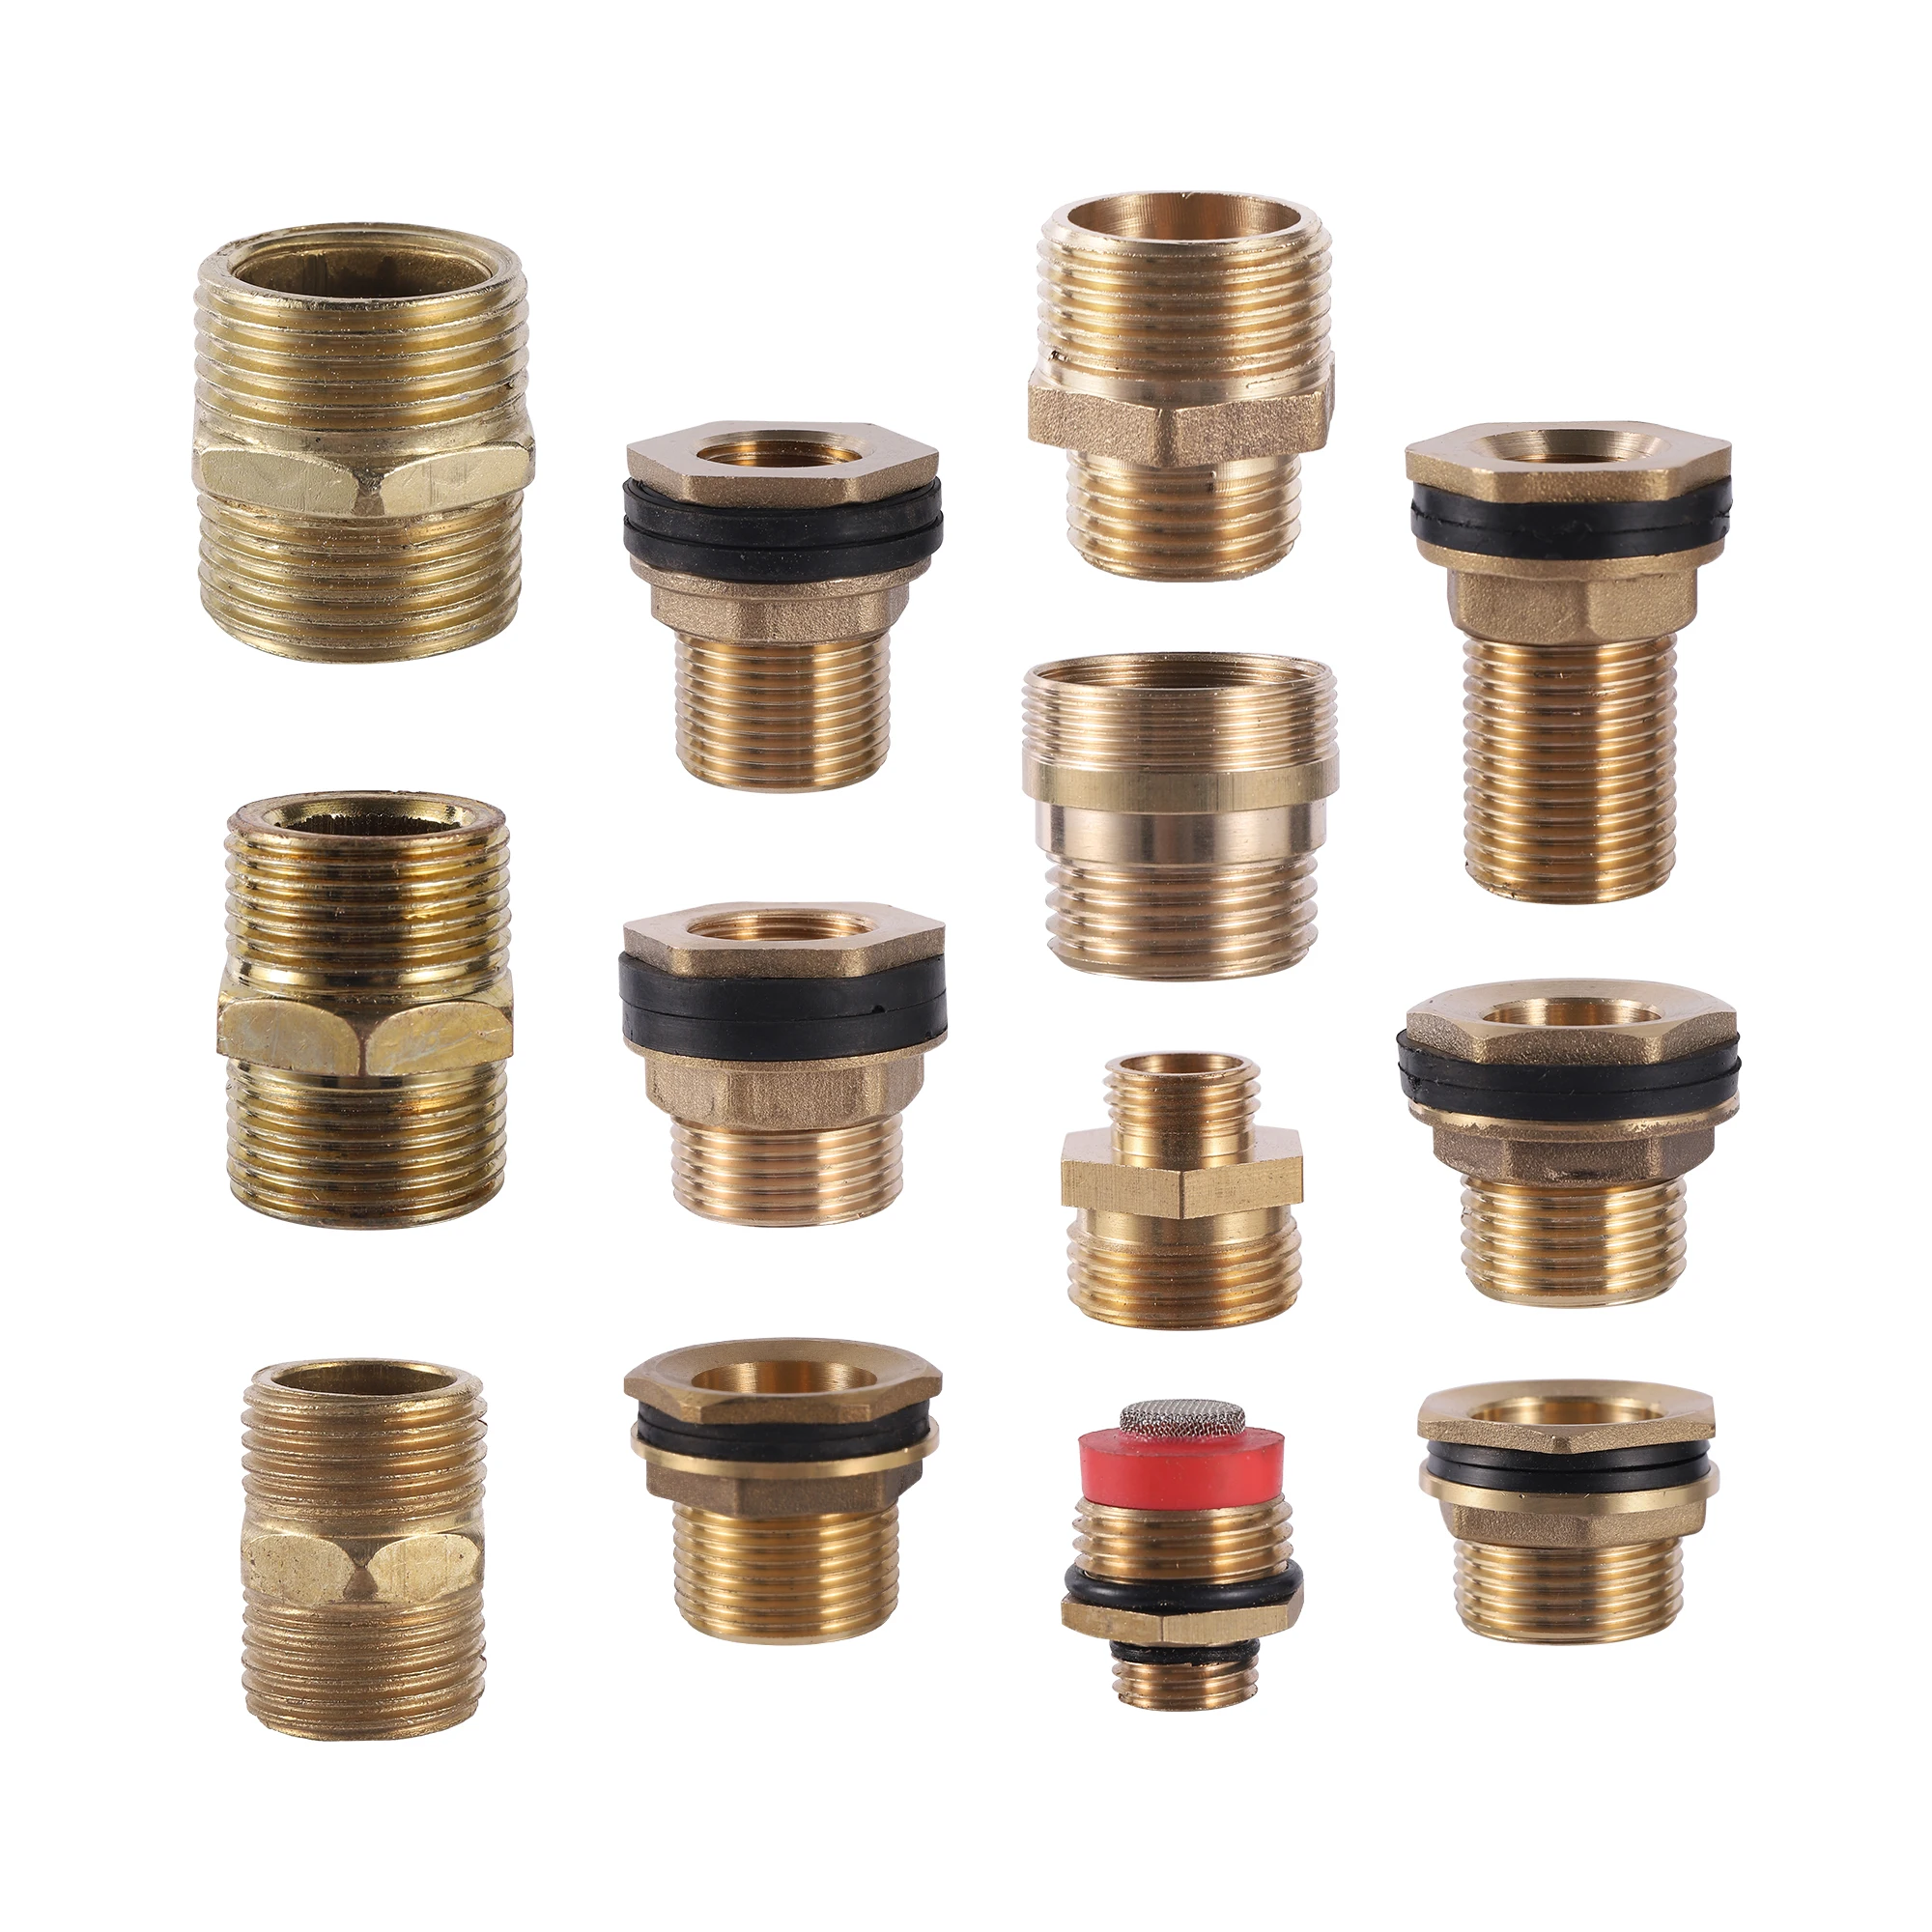 

1/2"3/4"1" Male And Female Thread Copper Connector Garden Hose Connection Accessories Water Pipe Repair Water Stop Joint Adapter